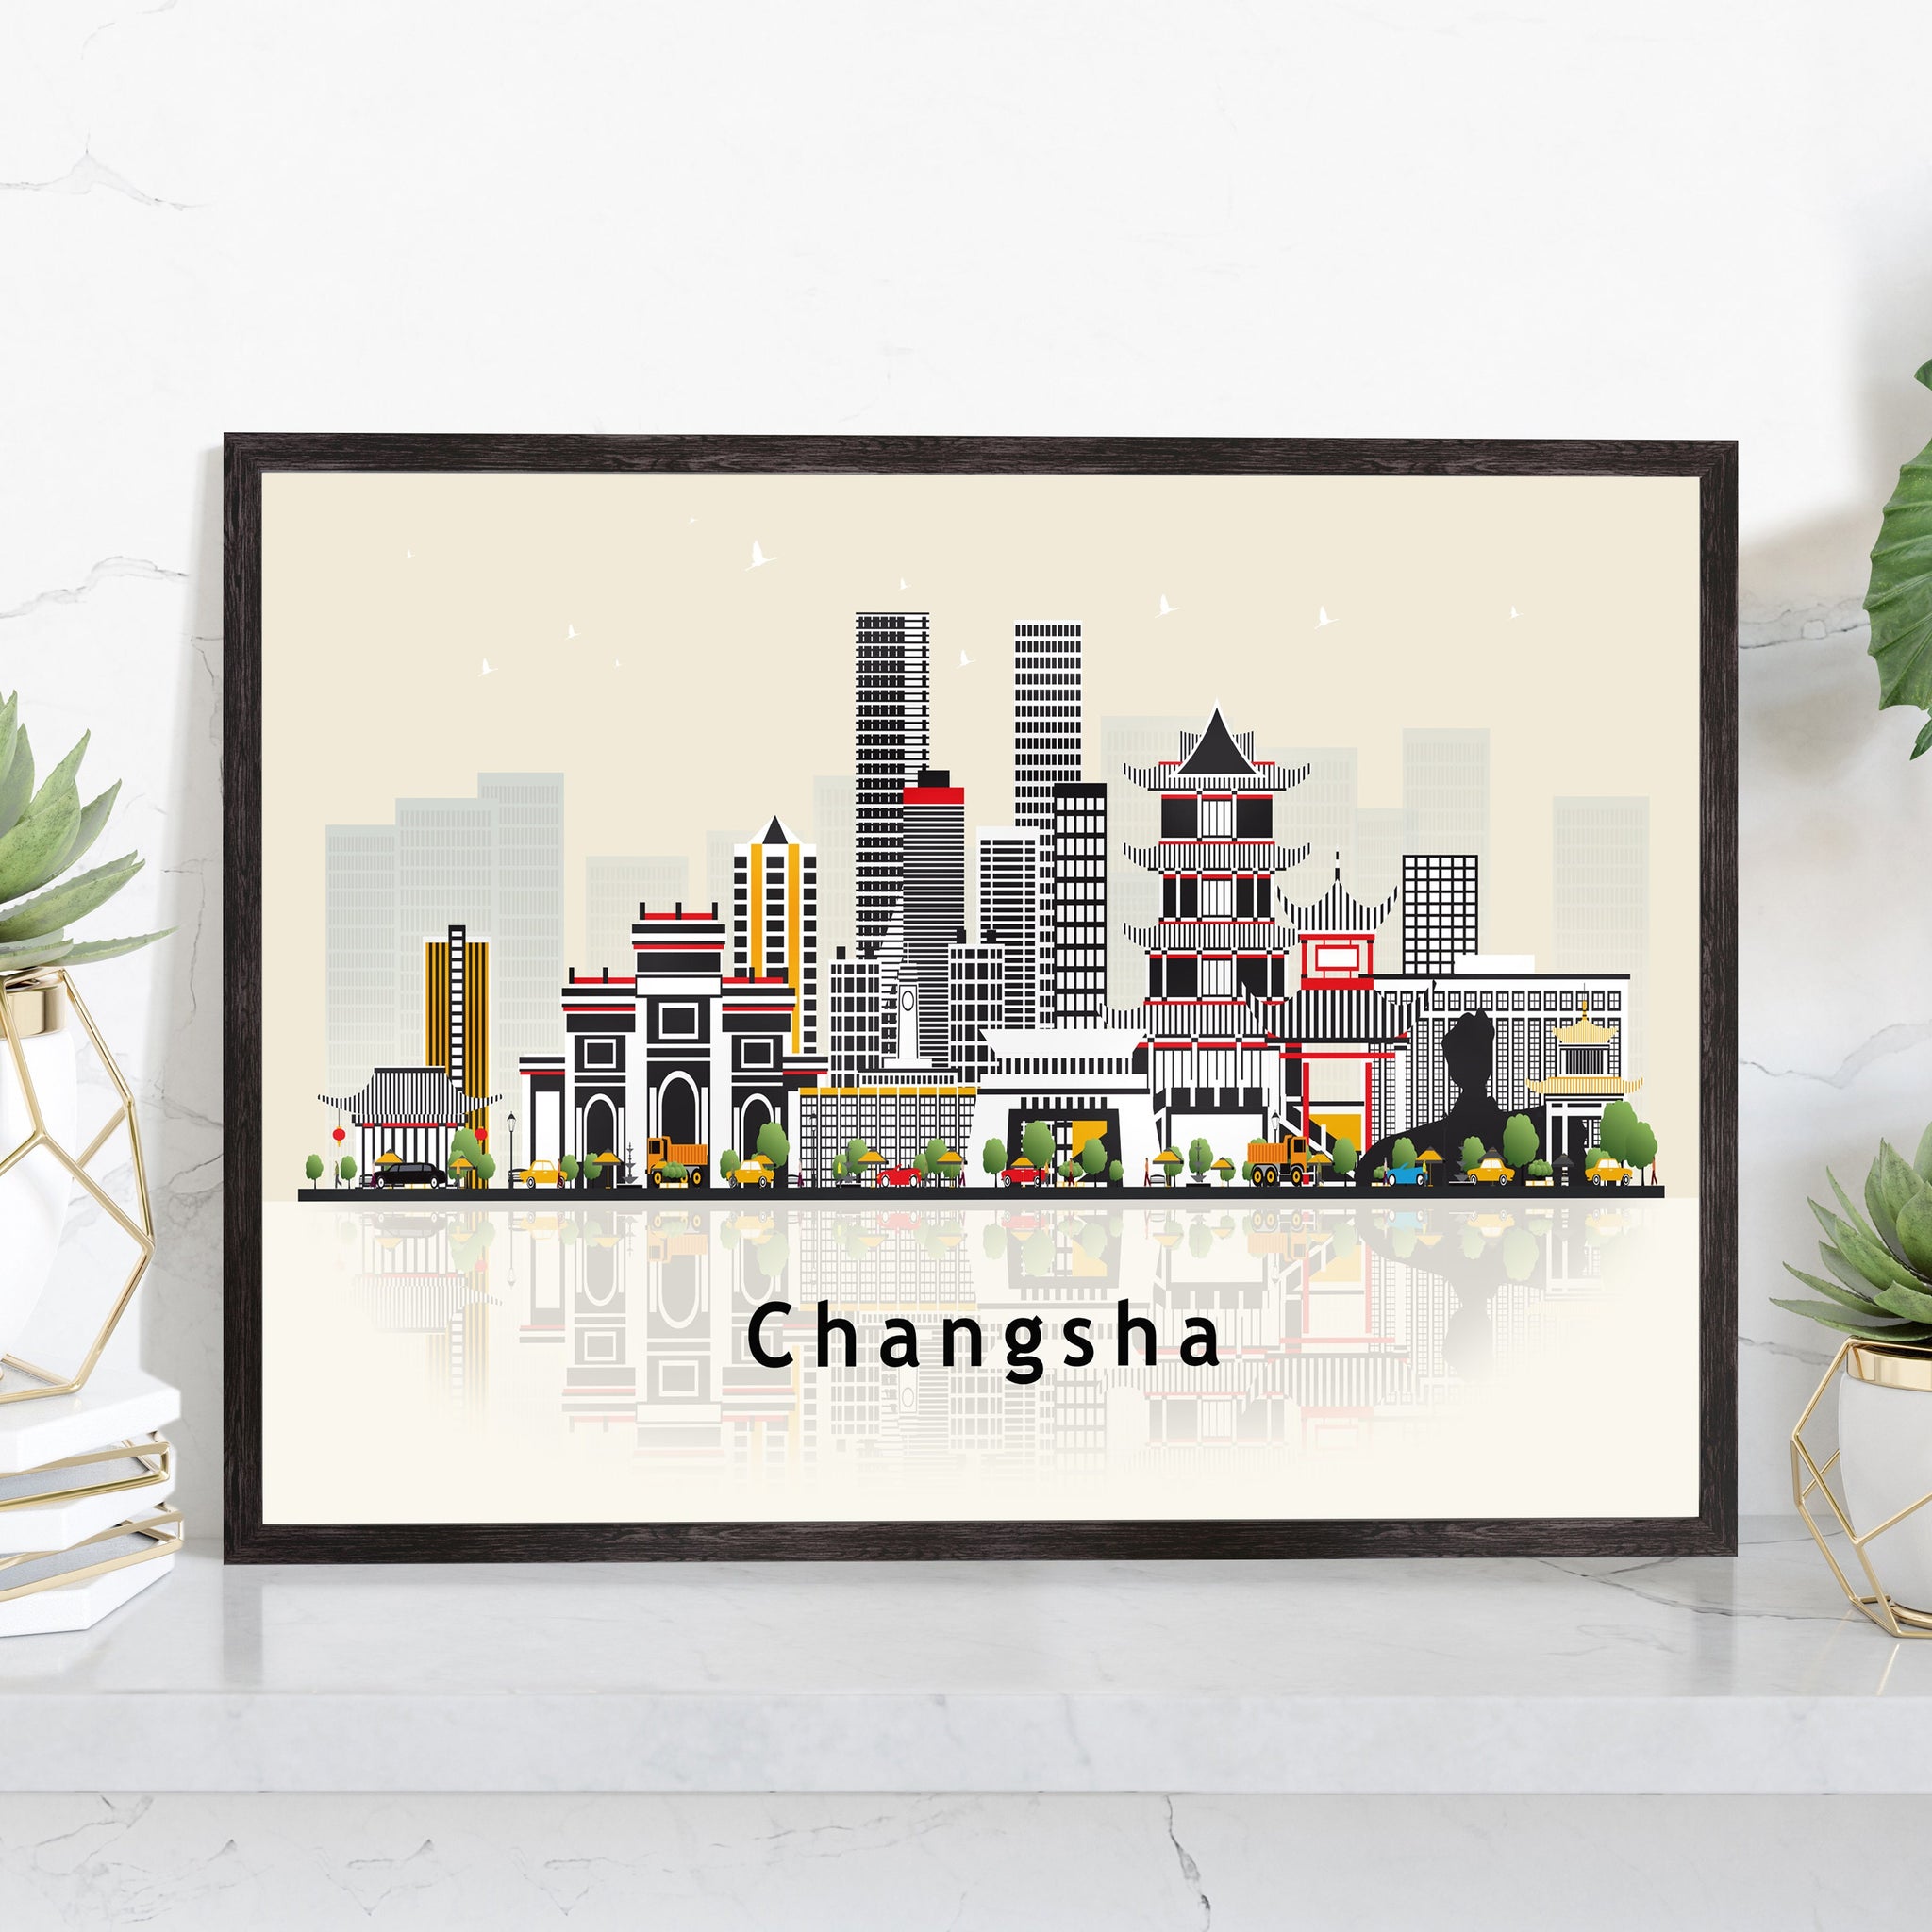 CHANGSHA CHINA Illustration skyline poster, Modern skyline cityscape poster, China city skyline landmark map poster, Home wall decoration